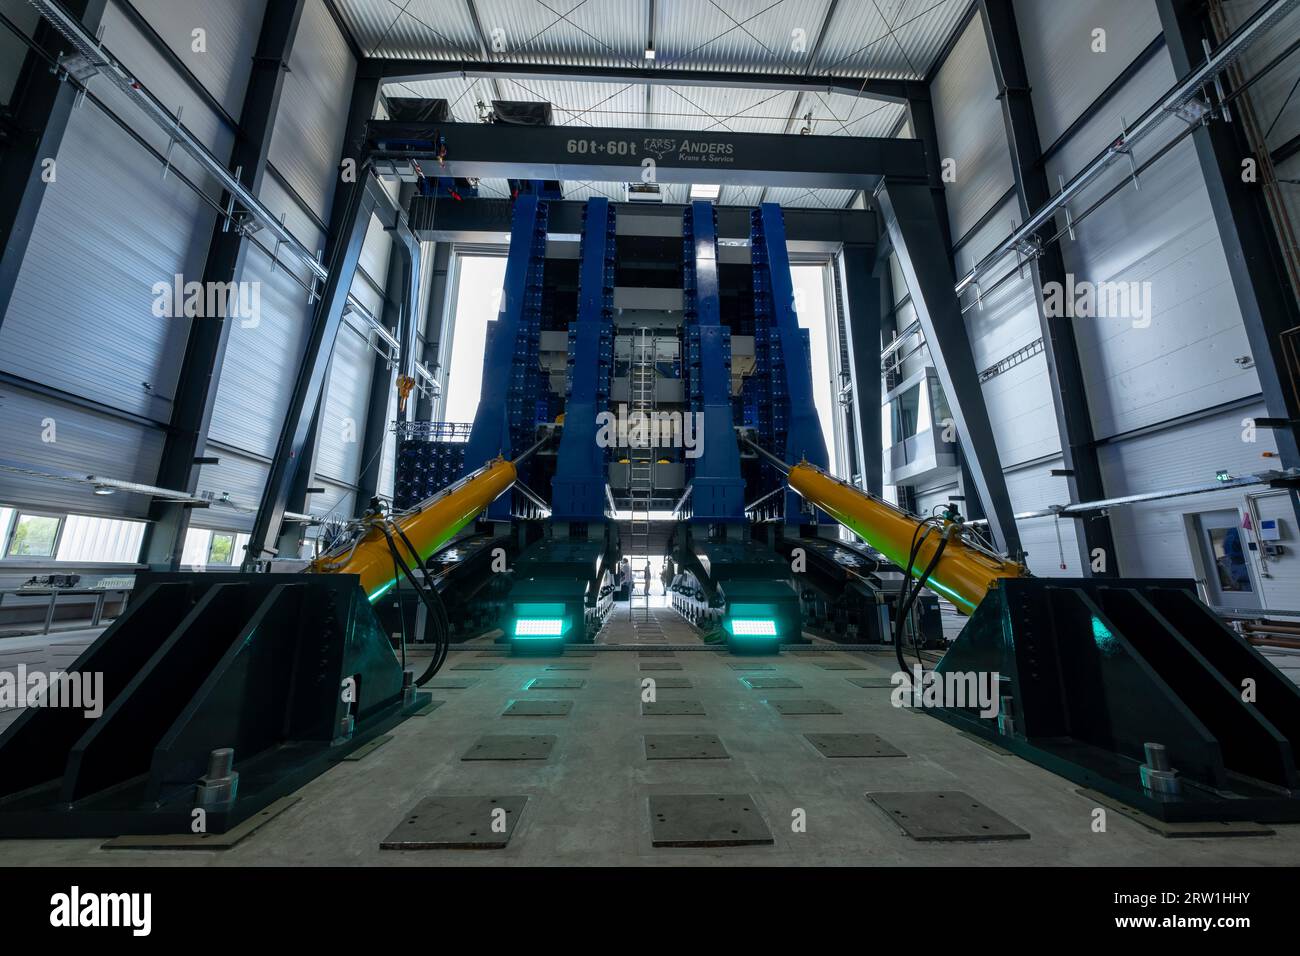 30.06.2023, Germany, Bremen, Bremerhaven - Inauguration of the 115m+ rotor blade test rig (for wind turbines) at the Fraunhofer Institute IWES, view o Stock Photo